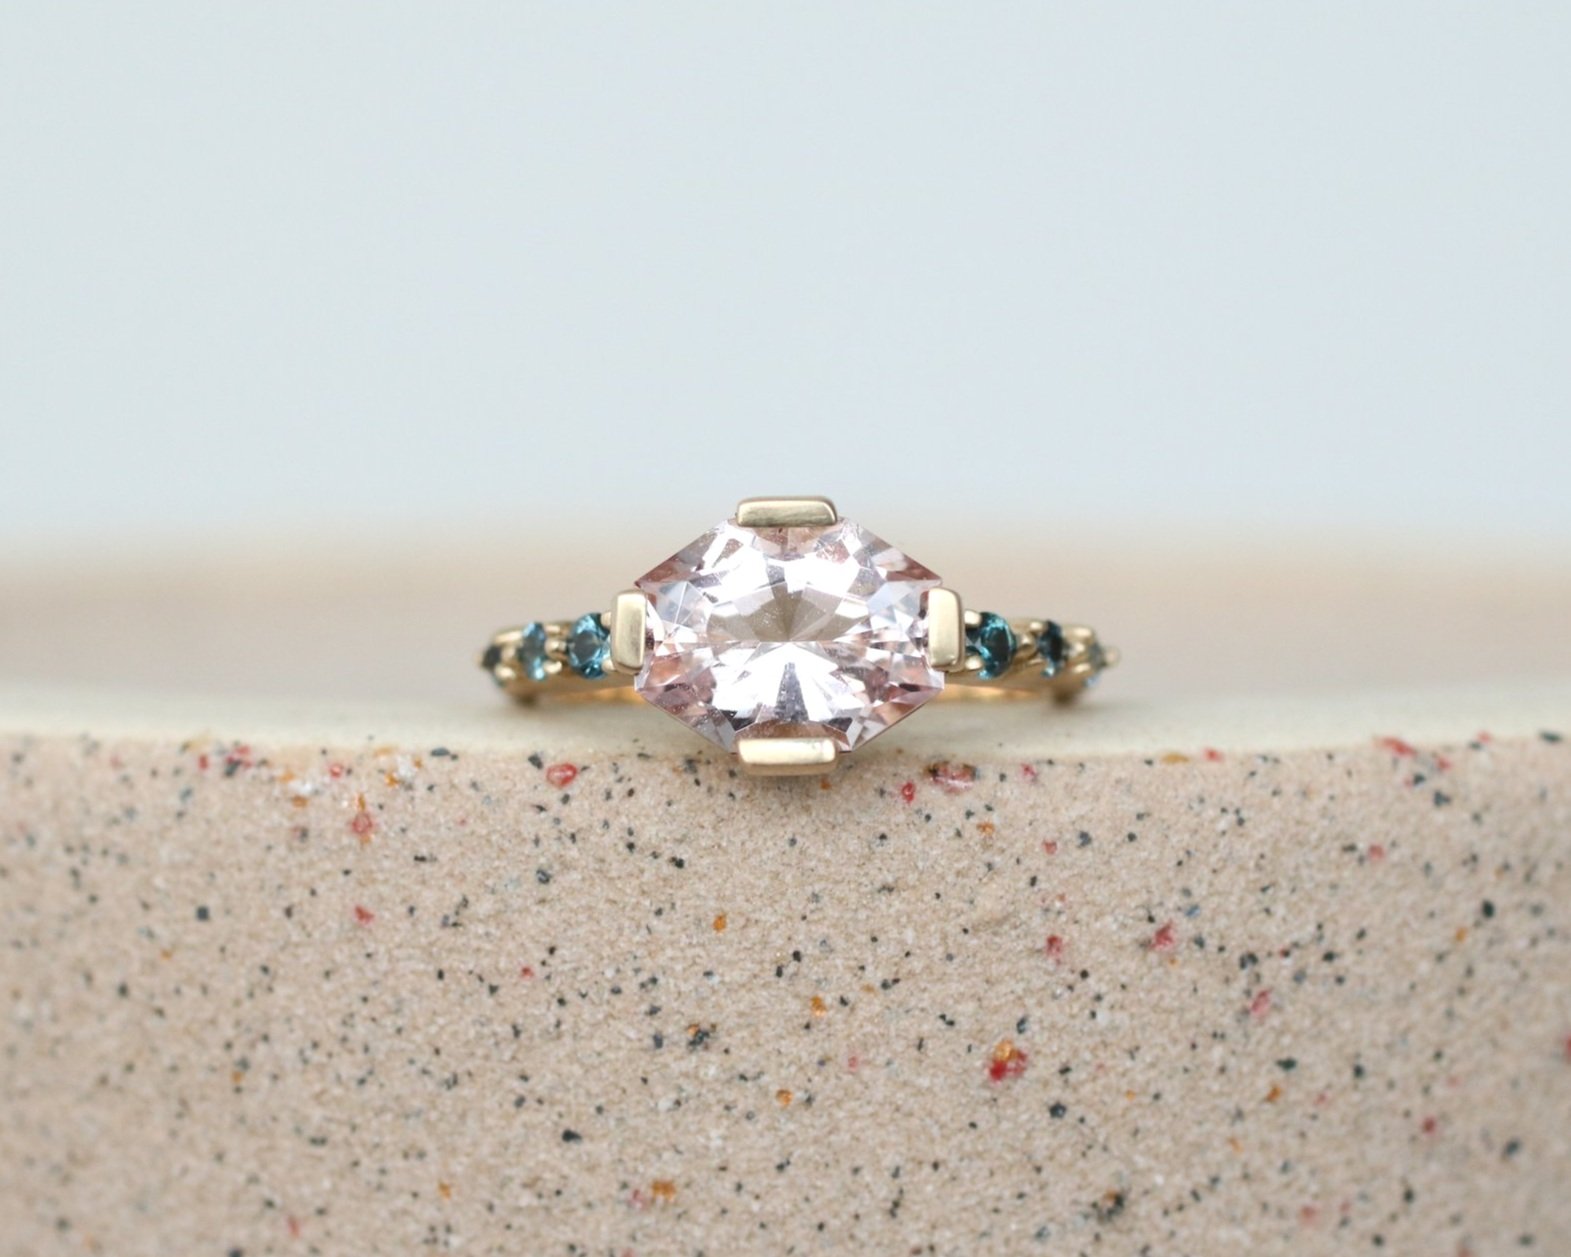 Kat engagement ring - Morganite center stone + grey spinel accents + 14k yellow gold